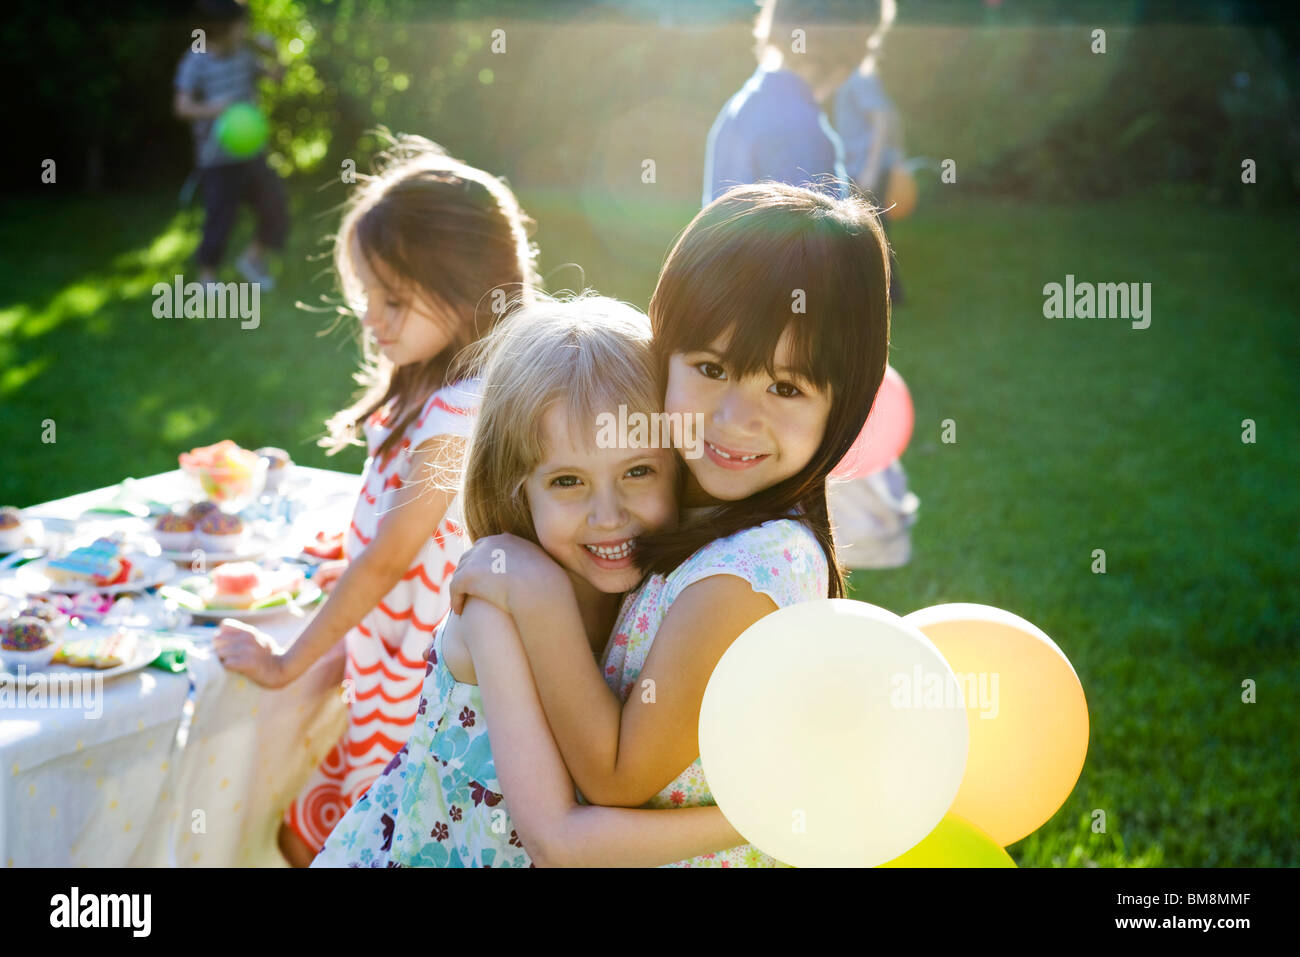 Young friends embracing at outdoor party, portrait Stock Photo